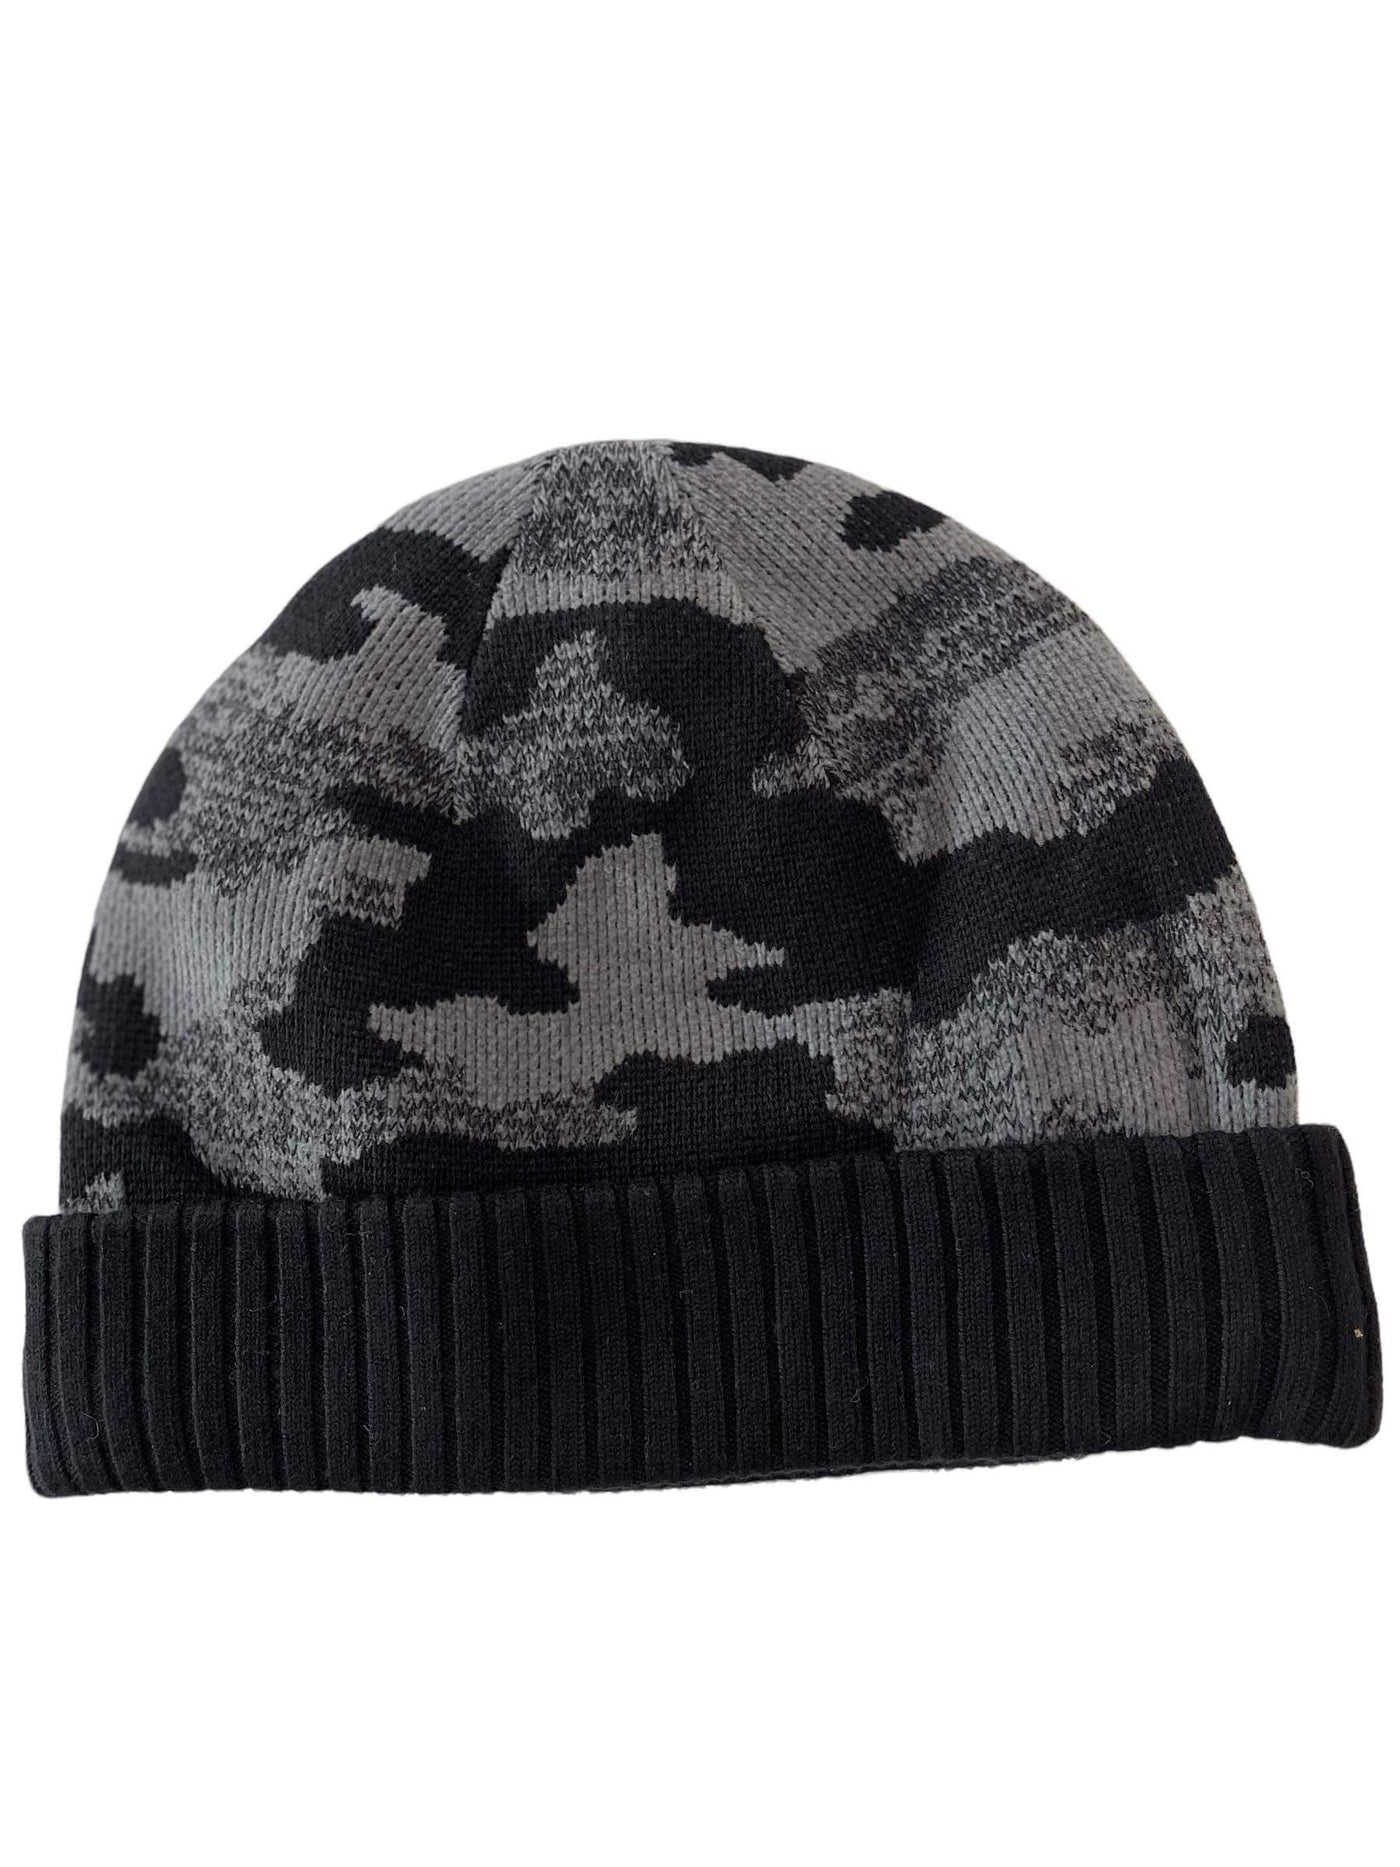 Room for Warmth | Beanie | Black Camo